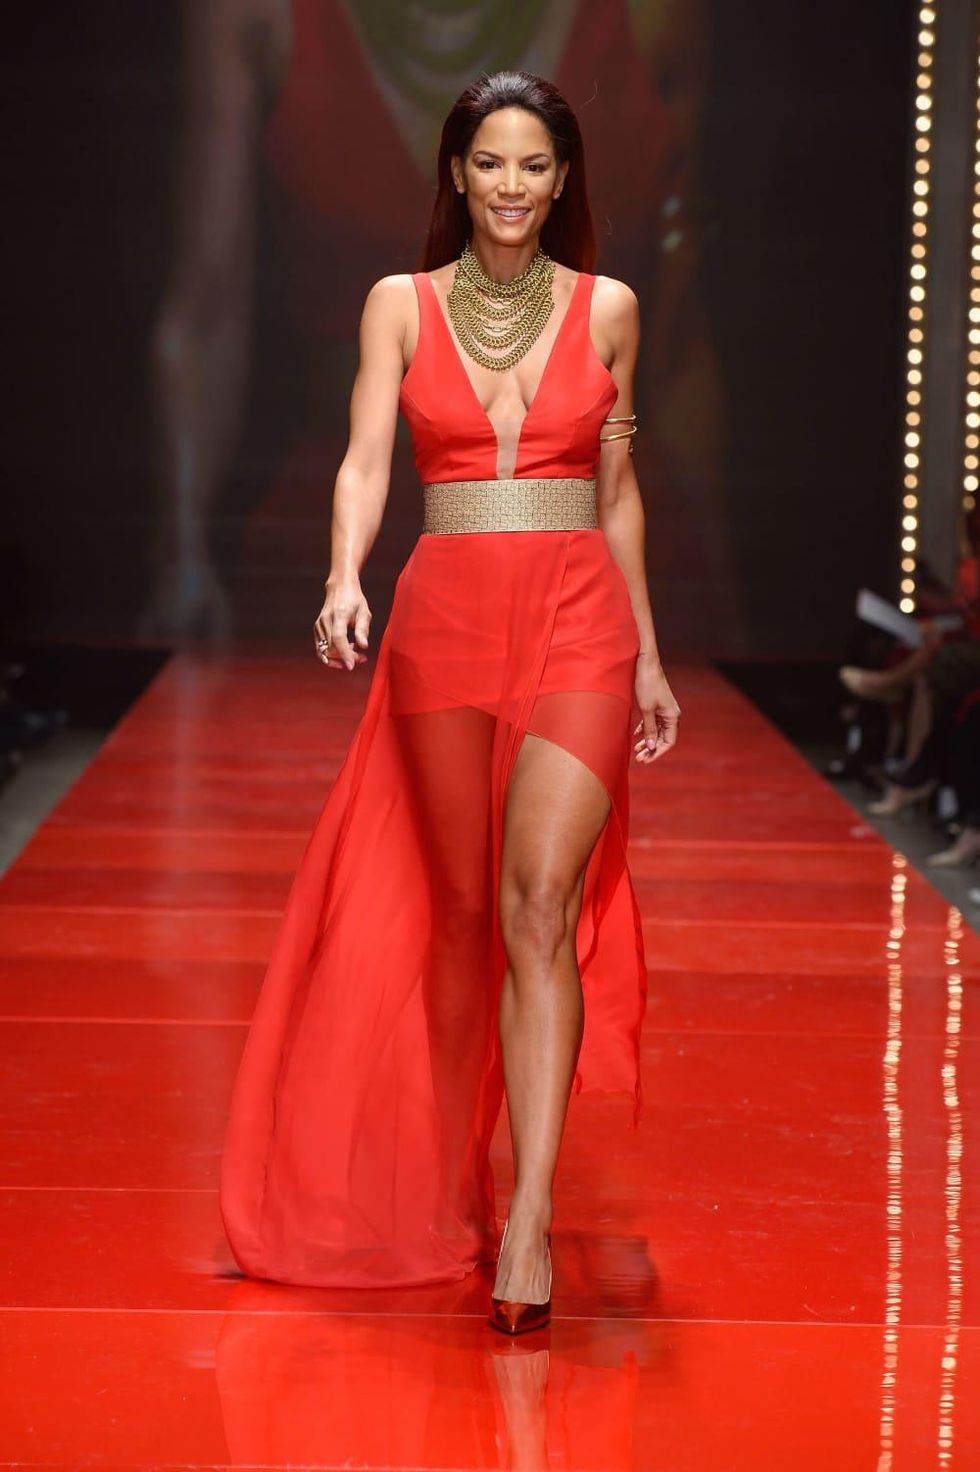 Model Veronica Webb walks the runway at the American Heart Association's Go Red For Women Red Dress Collection 2017